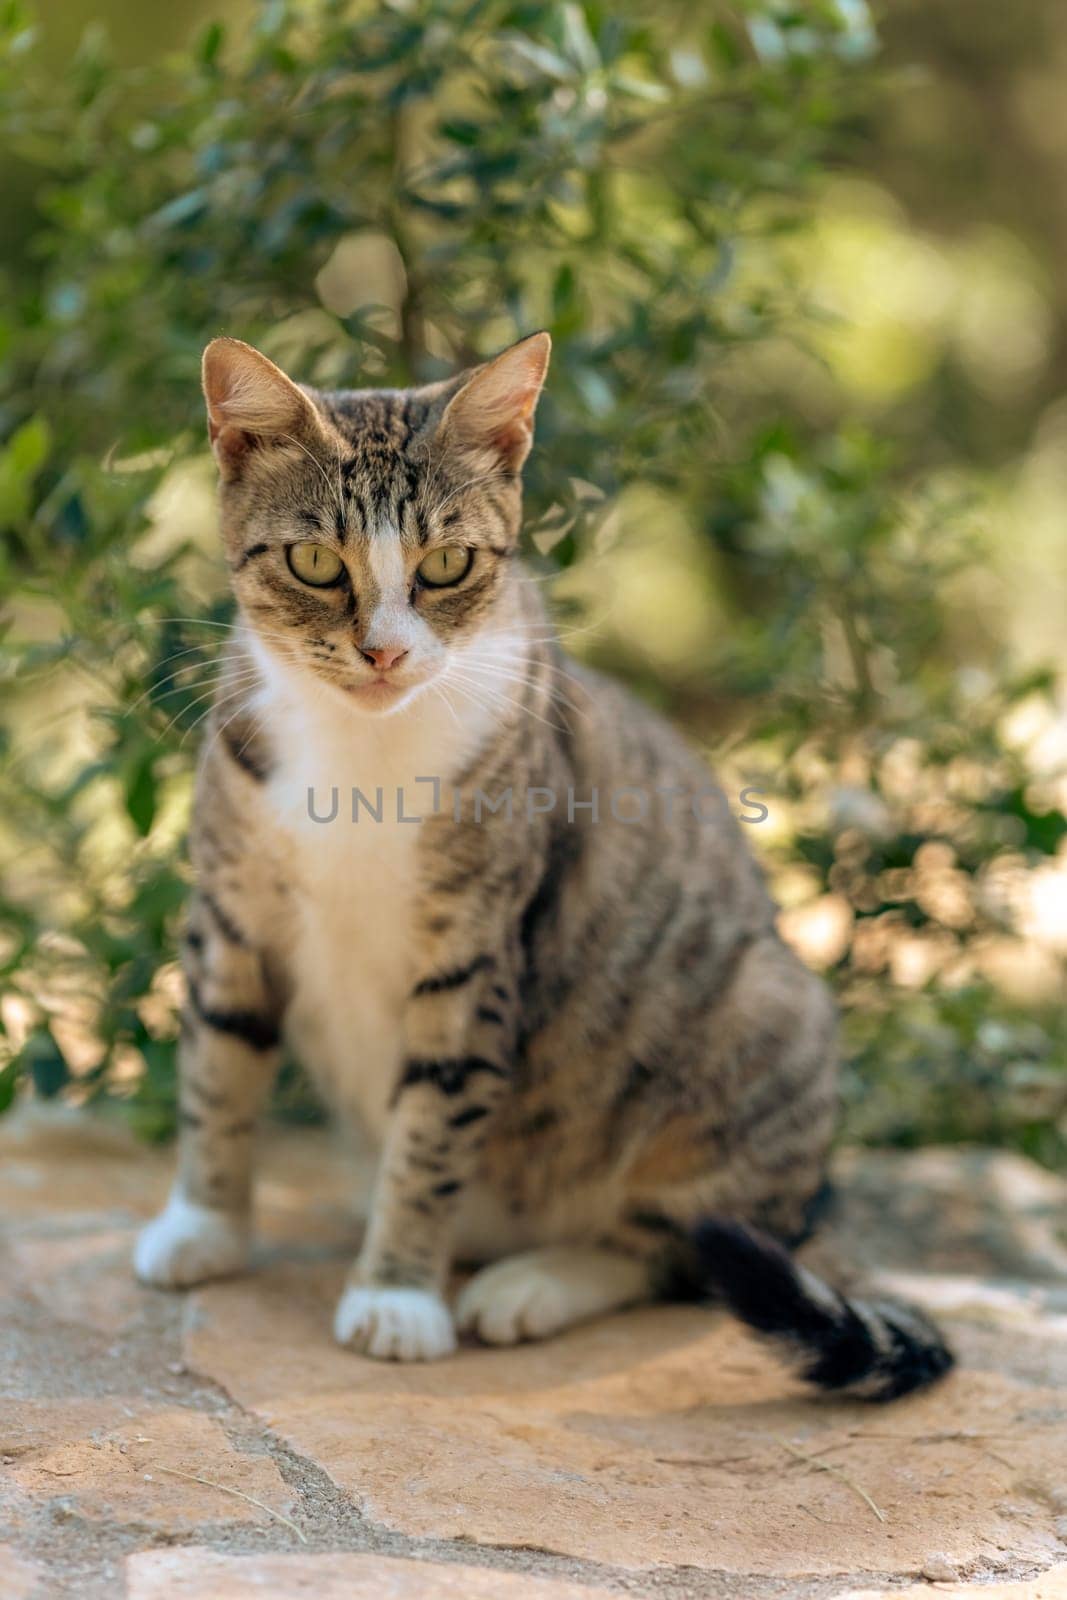 Homeless street tabby cat portrait, young stray kitty in summer nature of park